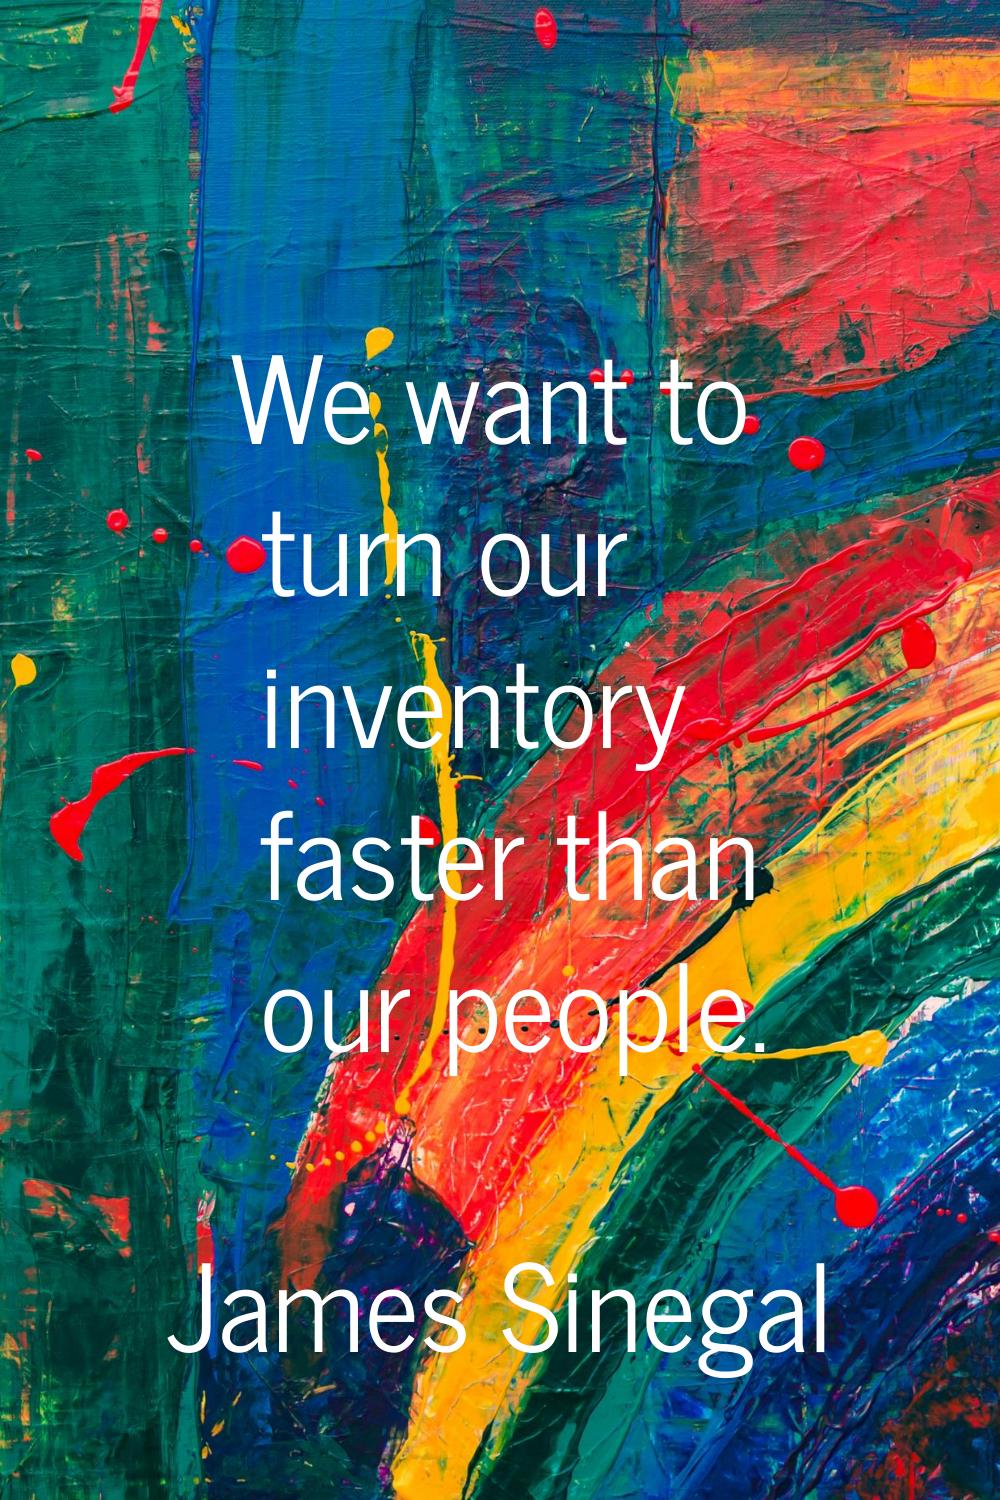 We want to turn our inventory faster than our people.